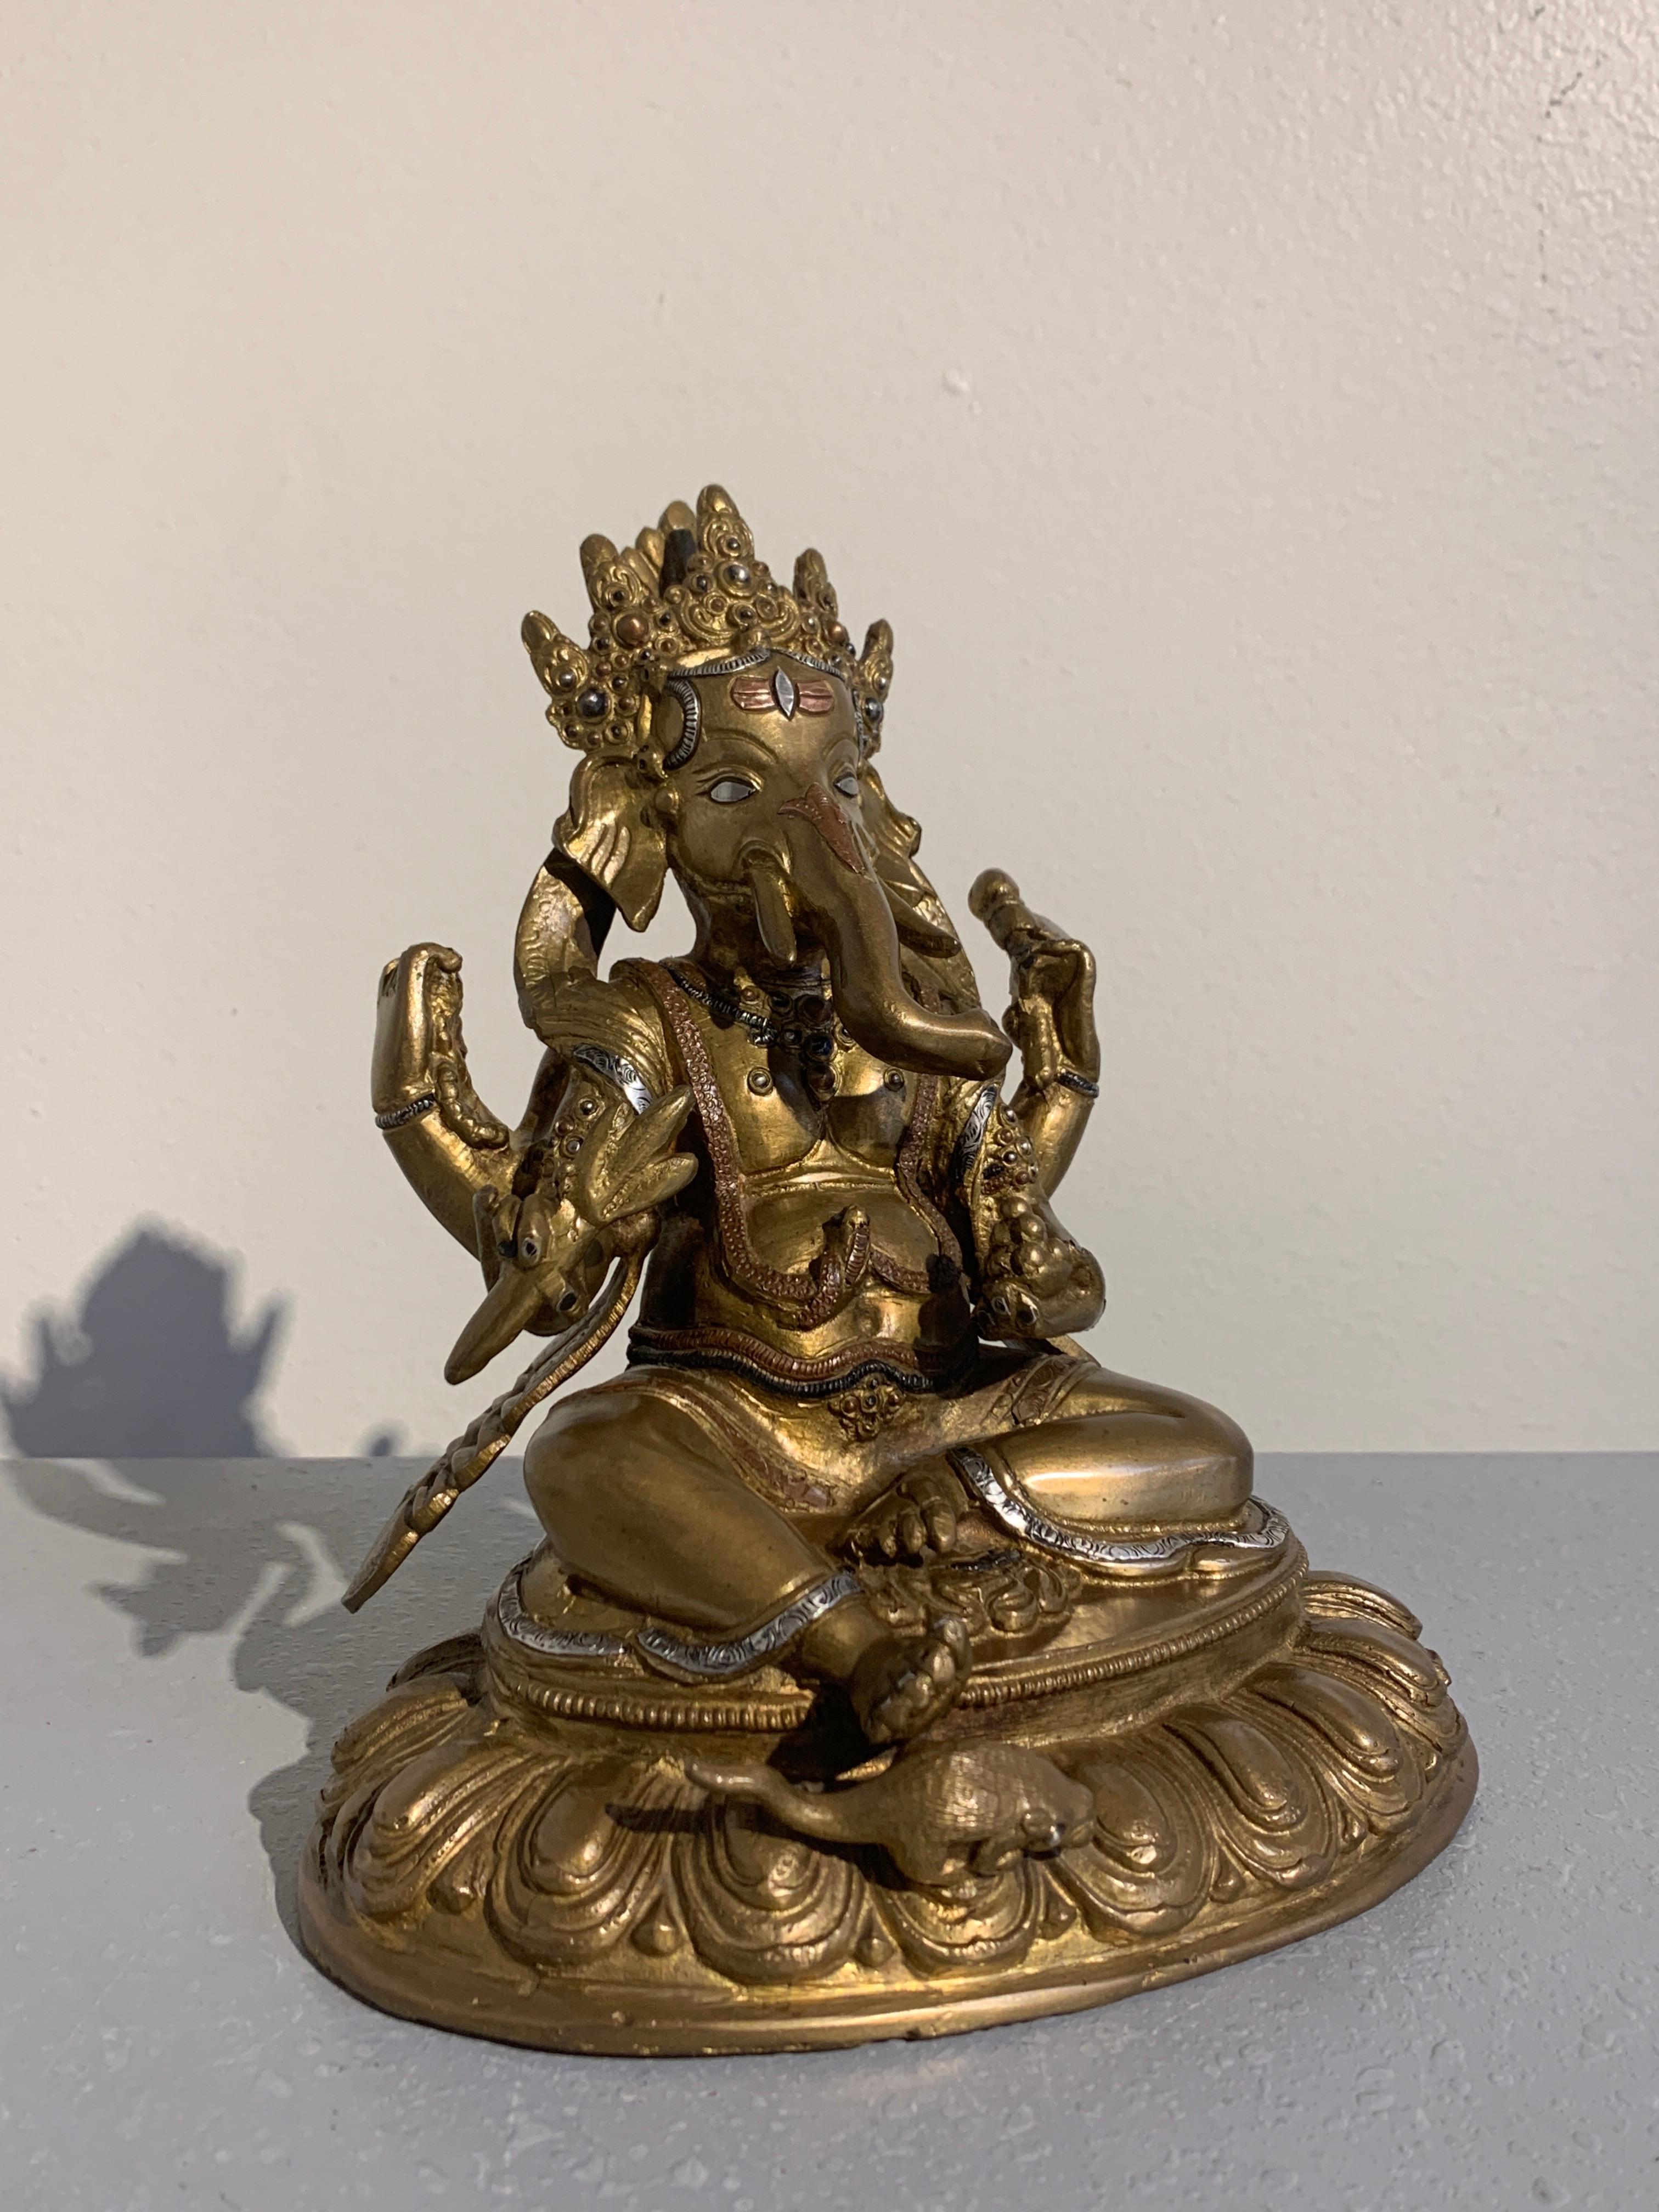 A charming and unusual figure of the Hindu god, Ganesha, Remover of Obstacles, featuring inlays and overlays of copper and silver, Nepal, 1970s. 

The beloved elephant headed deity, known as Ganesha, Ganesh, Ganapati, sits upon a lotus pedestal in